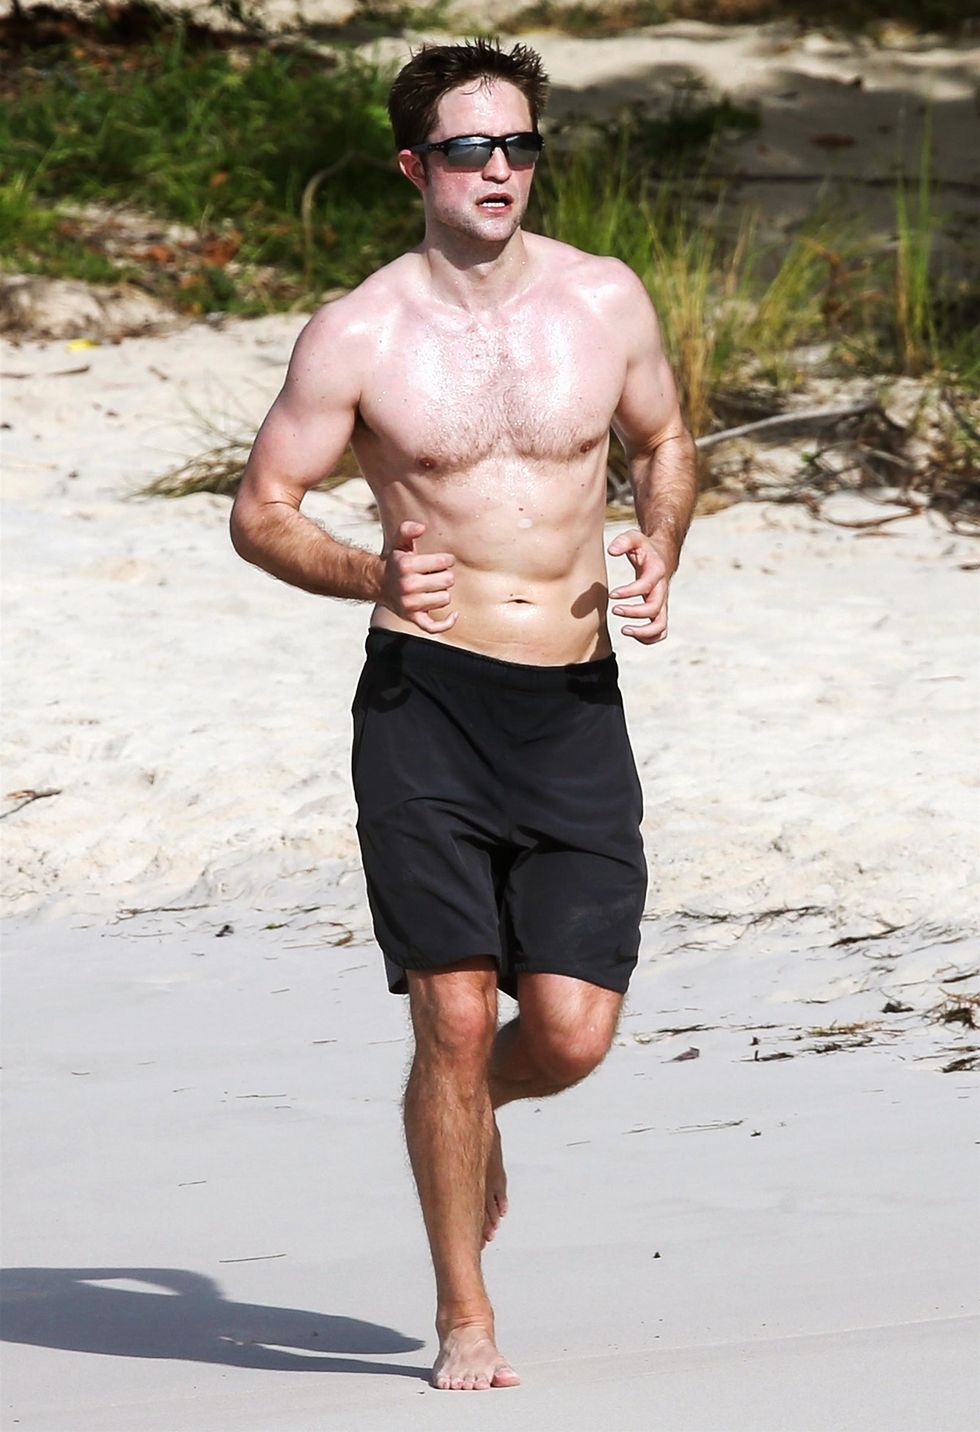 Barechested, Jogging, Muscle, Running, Chest, board short, Chin, Recreation, Arm, Stomach, 